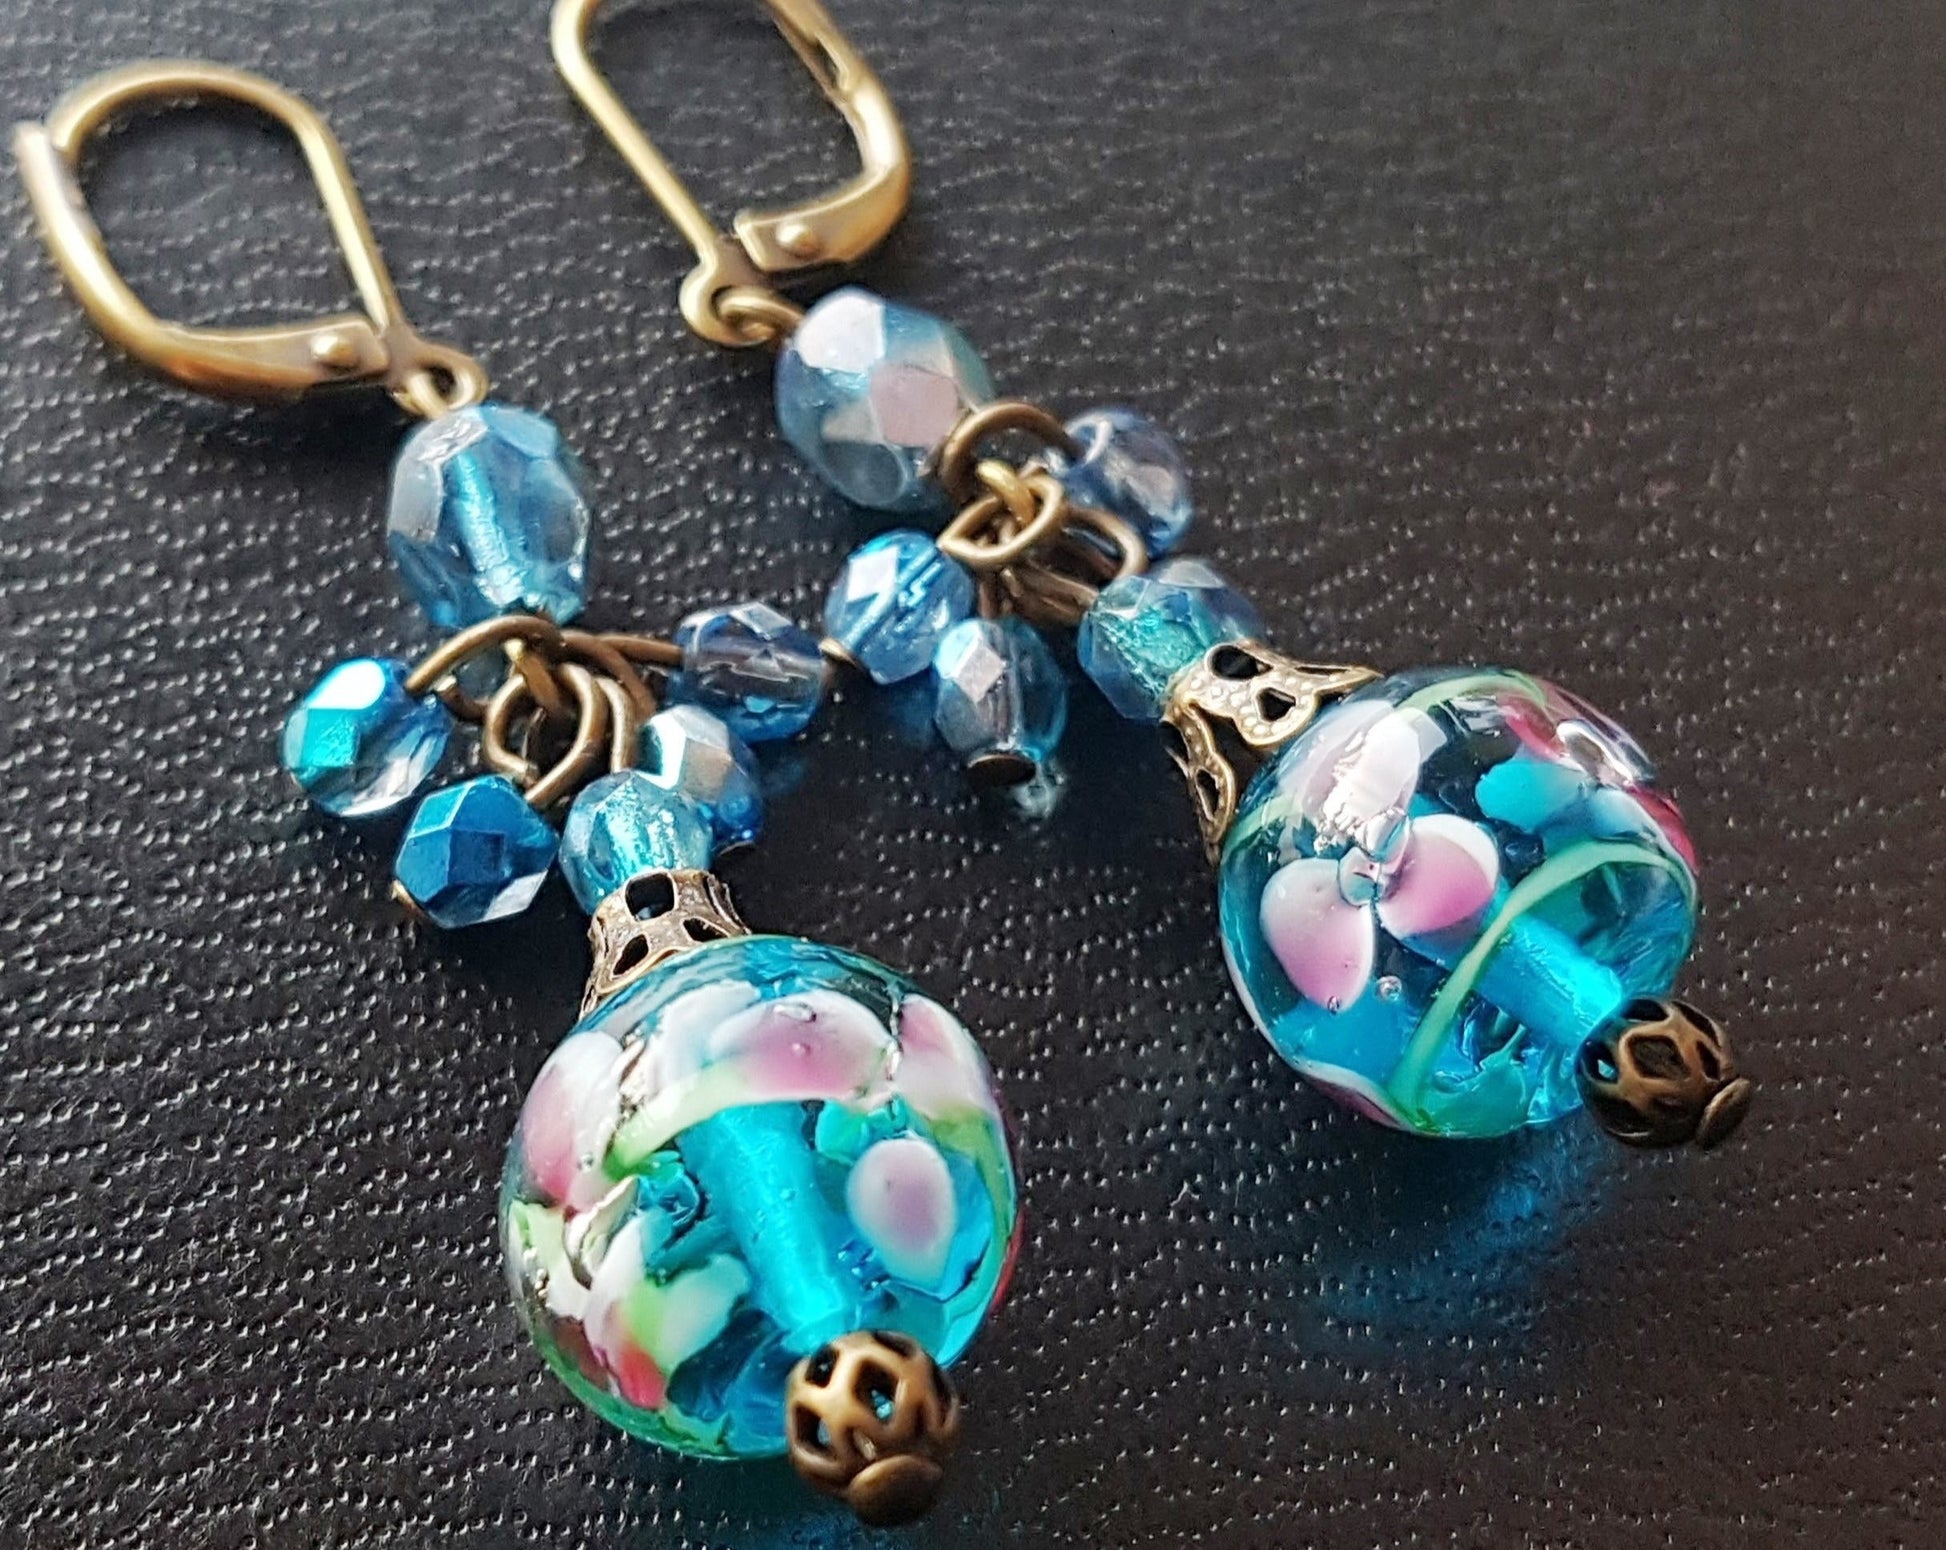 Long Blue Floral Vintage Inspired Earrings made with deep aqua blue beads, floral beads, and sparkly clusters above. The earrings are displayed on Black surface